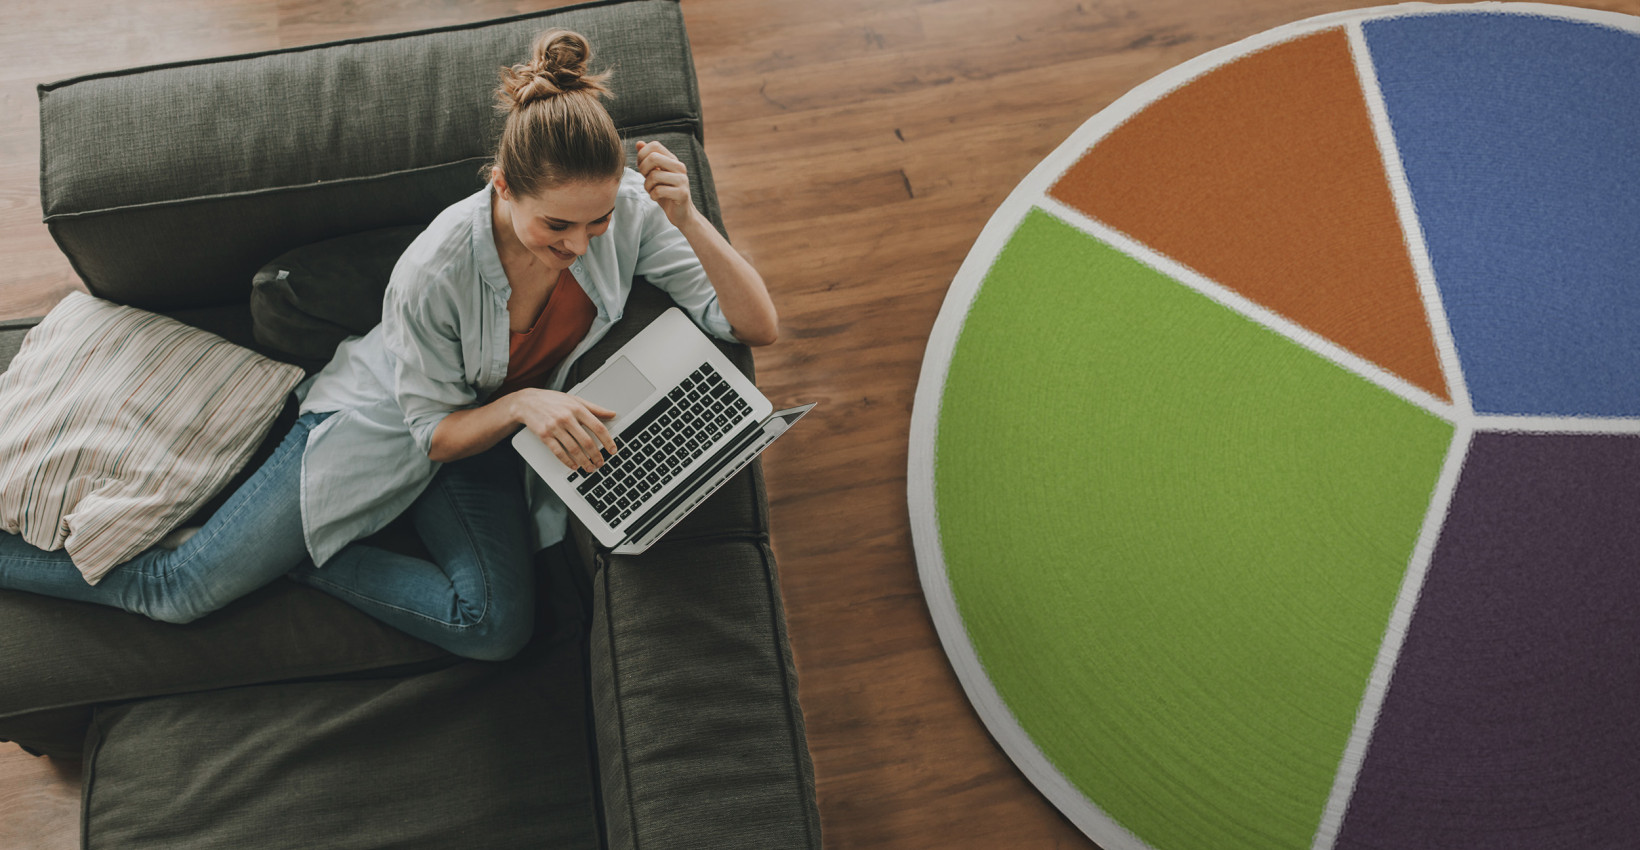 A woman sitting next to a rug that looks like a giant pie chart